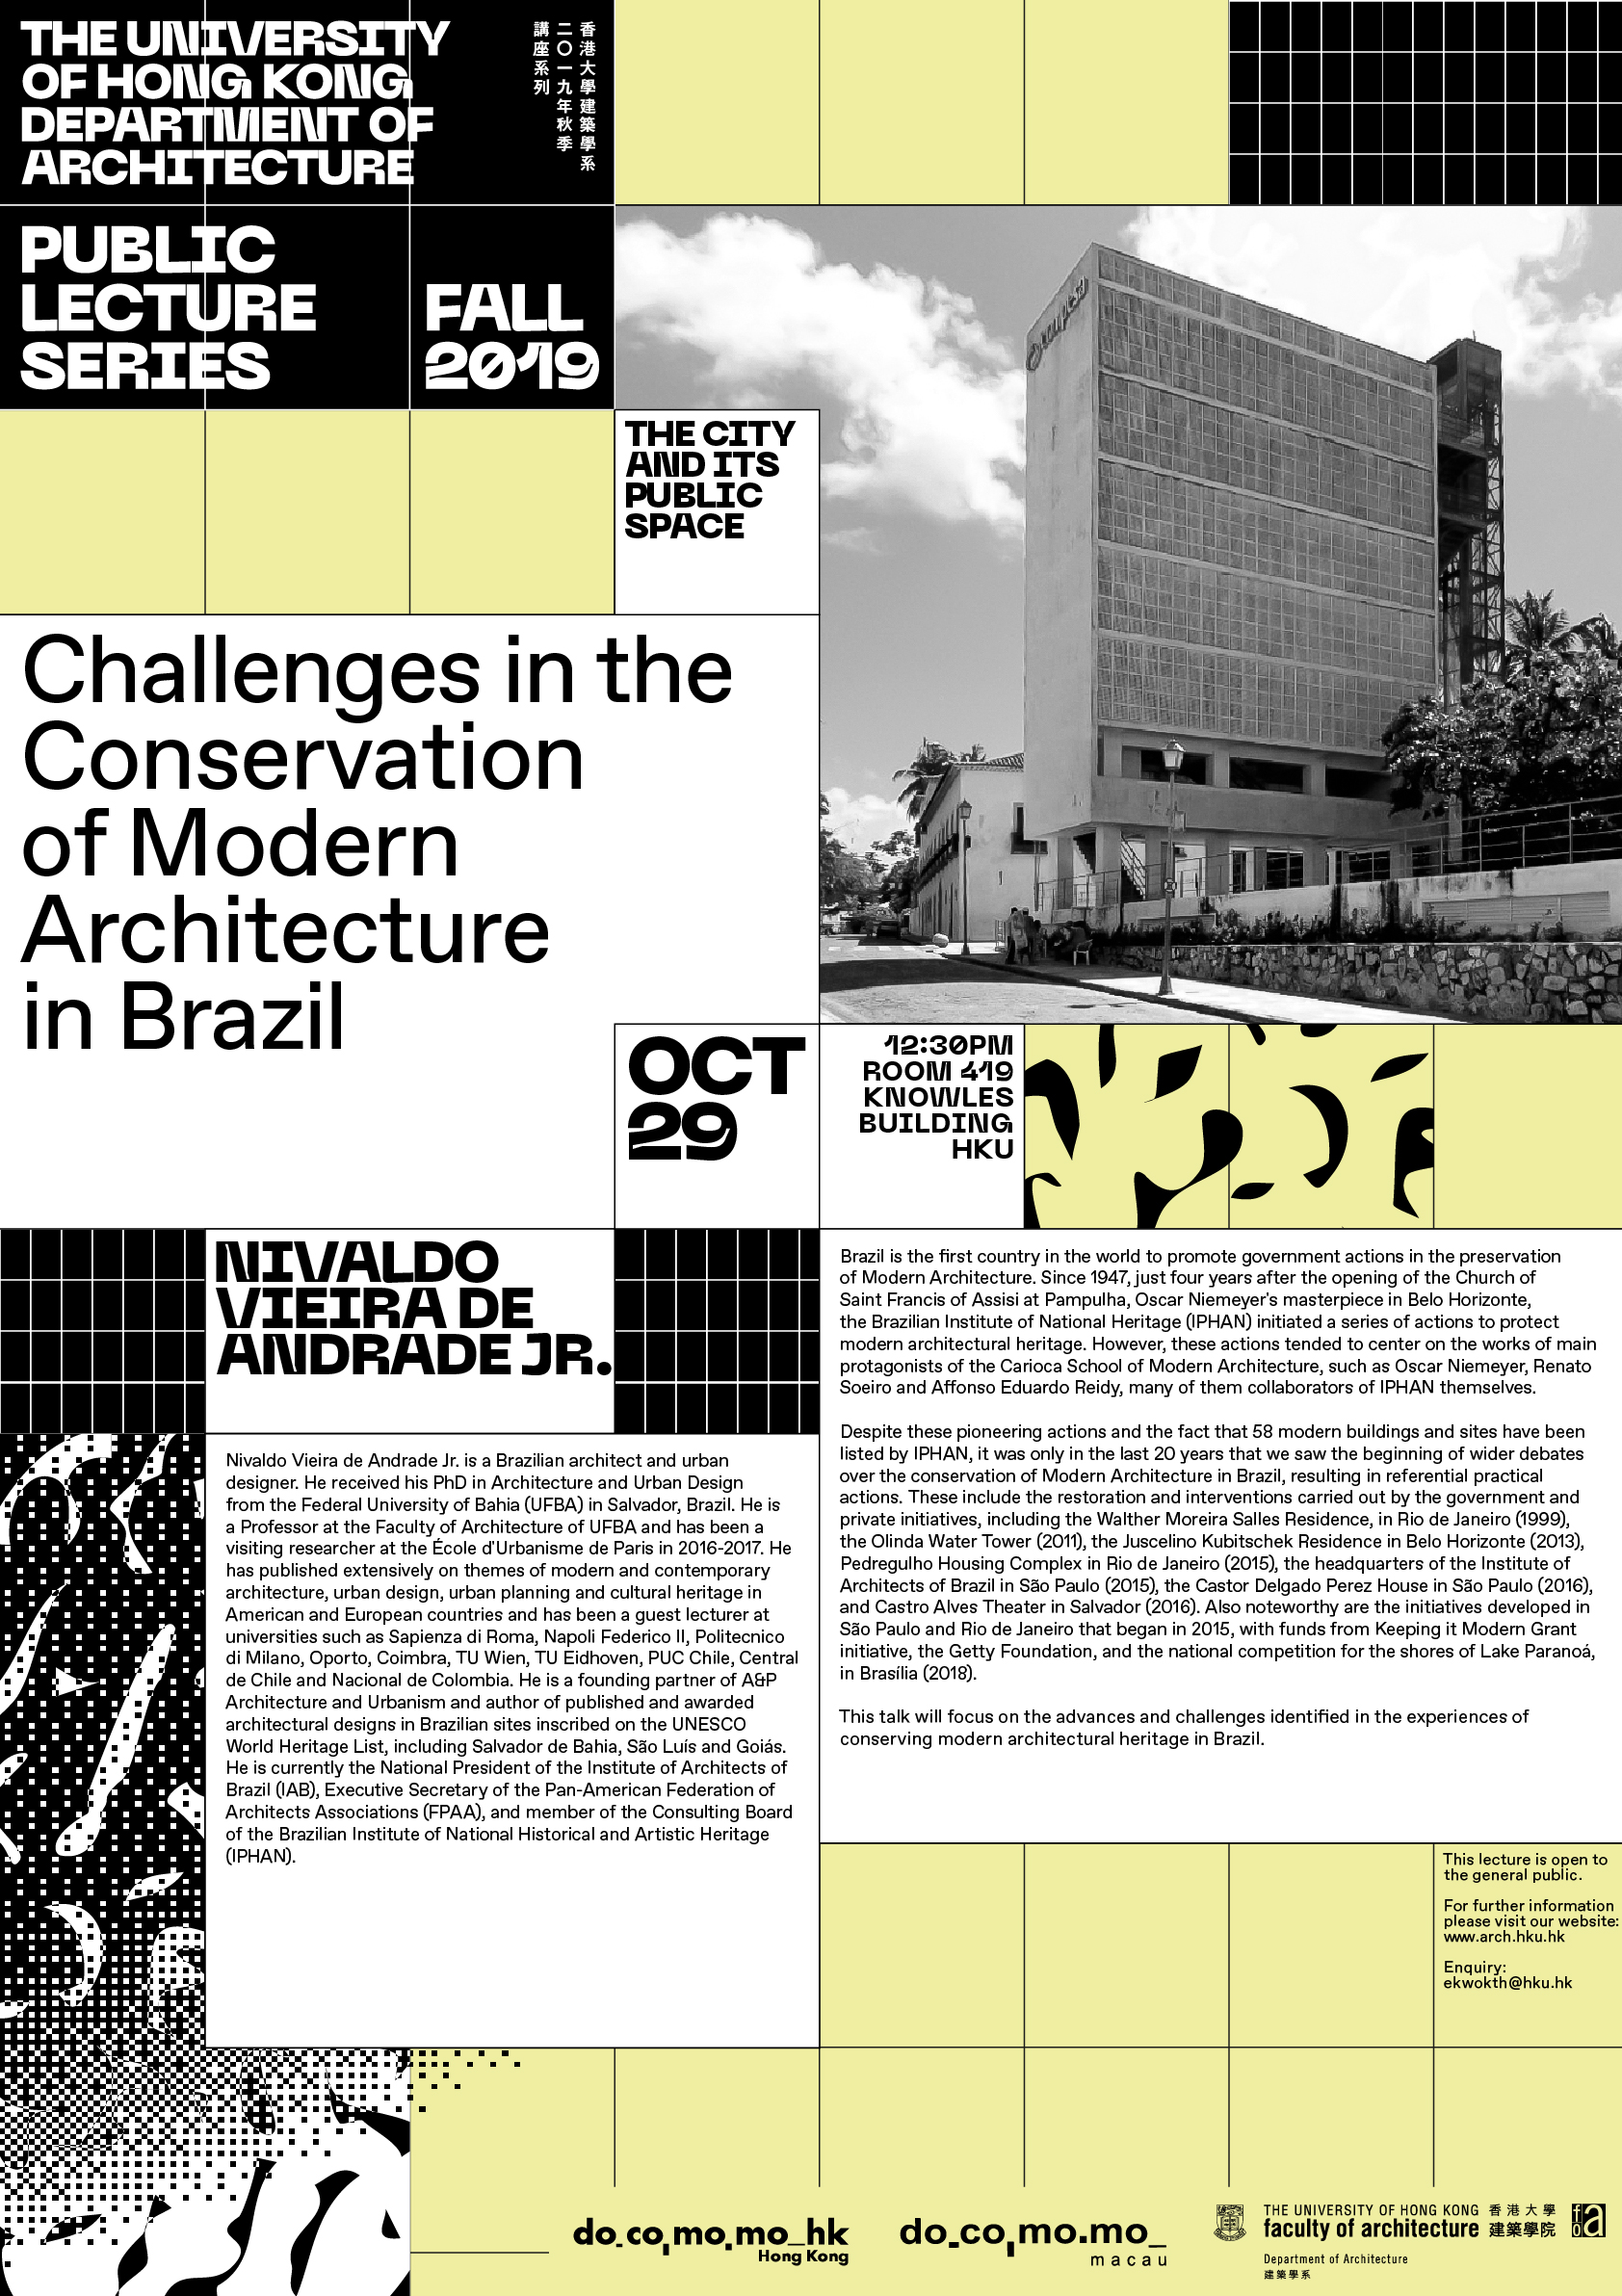 HKU Architecture: 'Challenges in the Conservation of Modern Architecture in Brazil' by Nivaldo Vieira de Andrade Jr.